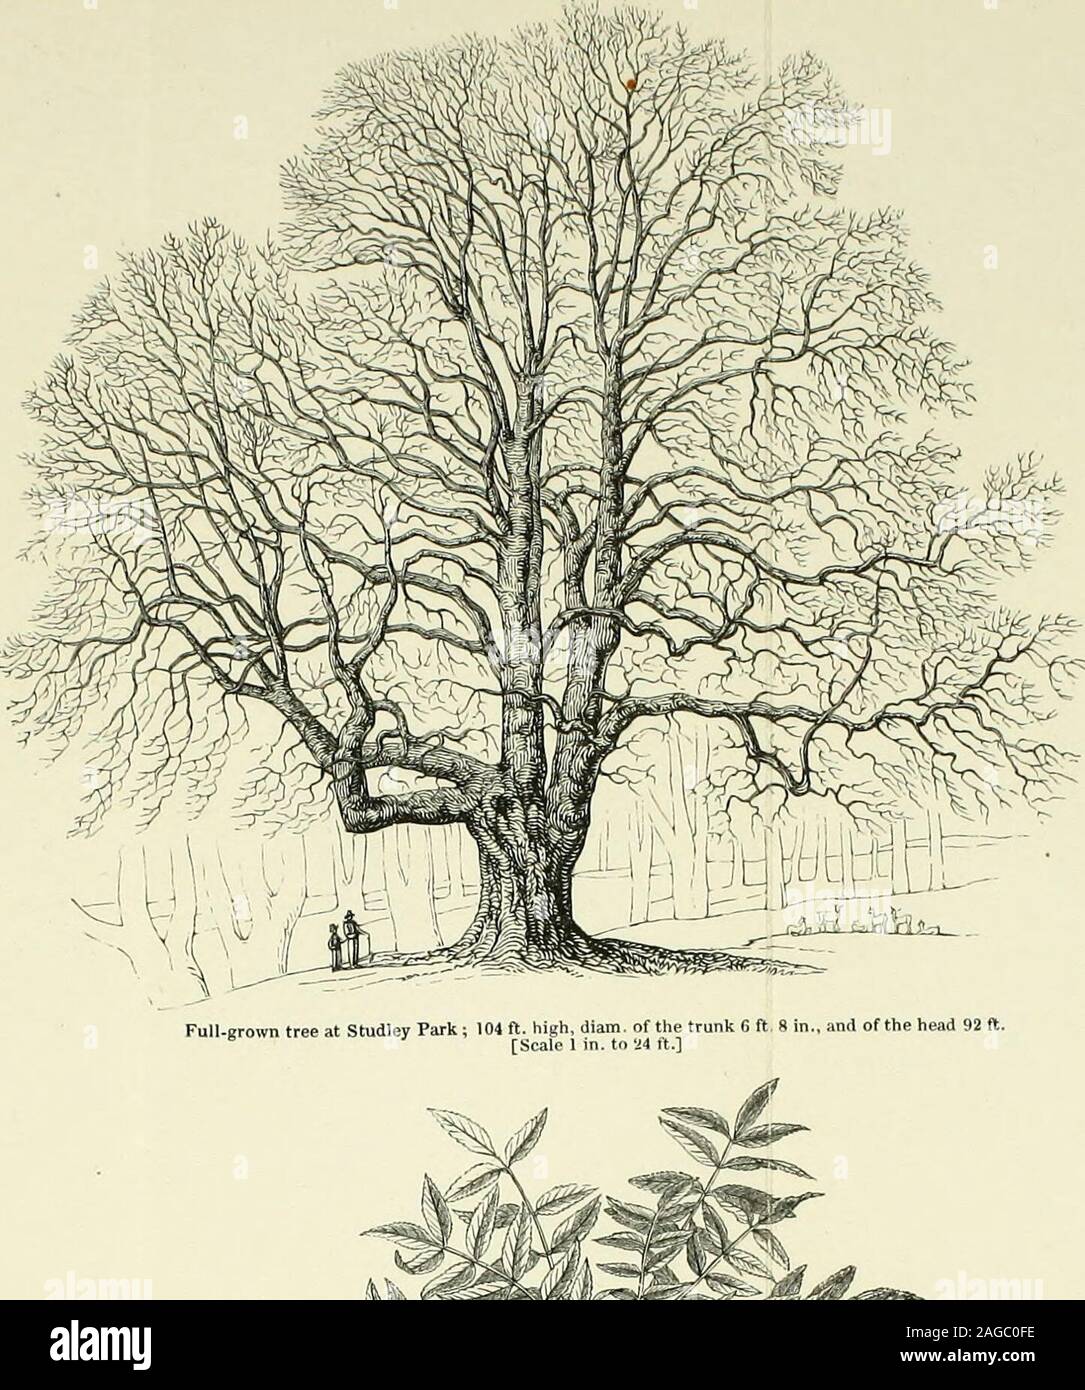 . Arboretum et fruticetum britannicum, or : The trees and shrubs of Britain, native and foreign, hardy and half-hardy, pictorially and botanically delineated, and scientifically and popularly described .... l-ull-grown tree in Kensington Gardens ; 75 ft. high, diam. of the trunk 4 ft. C, in . of the head 48 ft. [Scale 1 in. to 12 ft.] Frdxinus excelsior. The taller, or common. Ash.. r&- If ^ x^ Frdxinus excelsior pendula.The pendulous-irowc/^ri taller, or weeping common, Ash. 20! Stock Photo